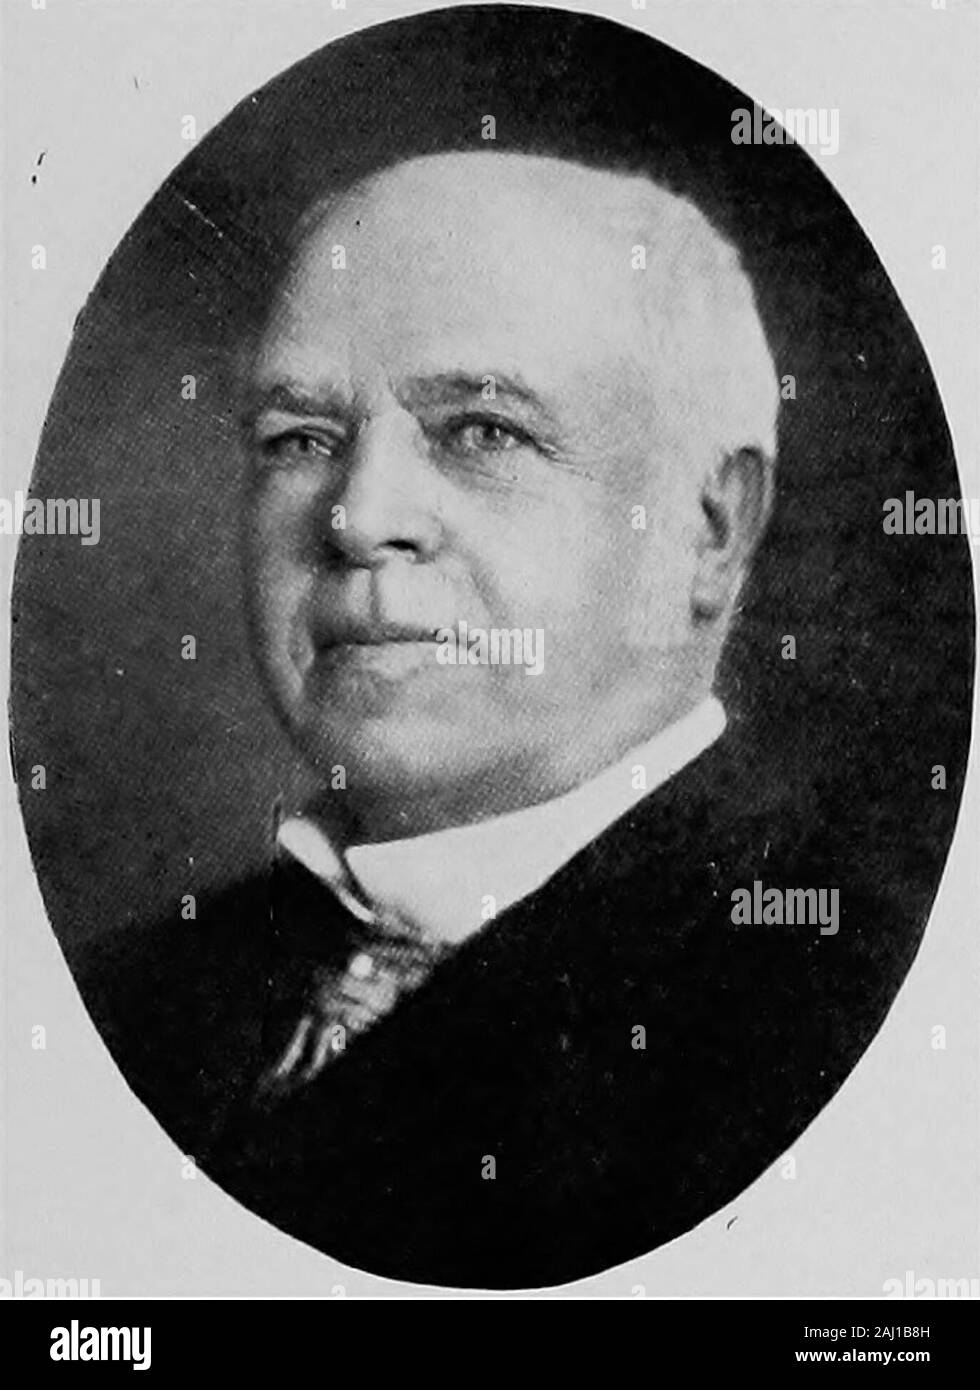 Empire state notables, 1914 . CHARLES TOMLINSON WILLS Builder and Banker New York City GENERAL GEORGE MOORE SMITH President and Director of Candee, Smith i Rowland Co., Masns. Mtls. New York City Empire State Notablescapitalists, merchants, etc. 53?. W. W. LAW Retired Carpet Merchant, President Briarcliff Realty Co., Dir. Nairn Linoleum Co., etc. New York City Stock Photo